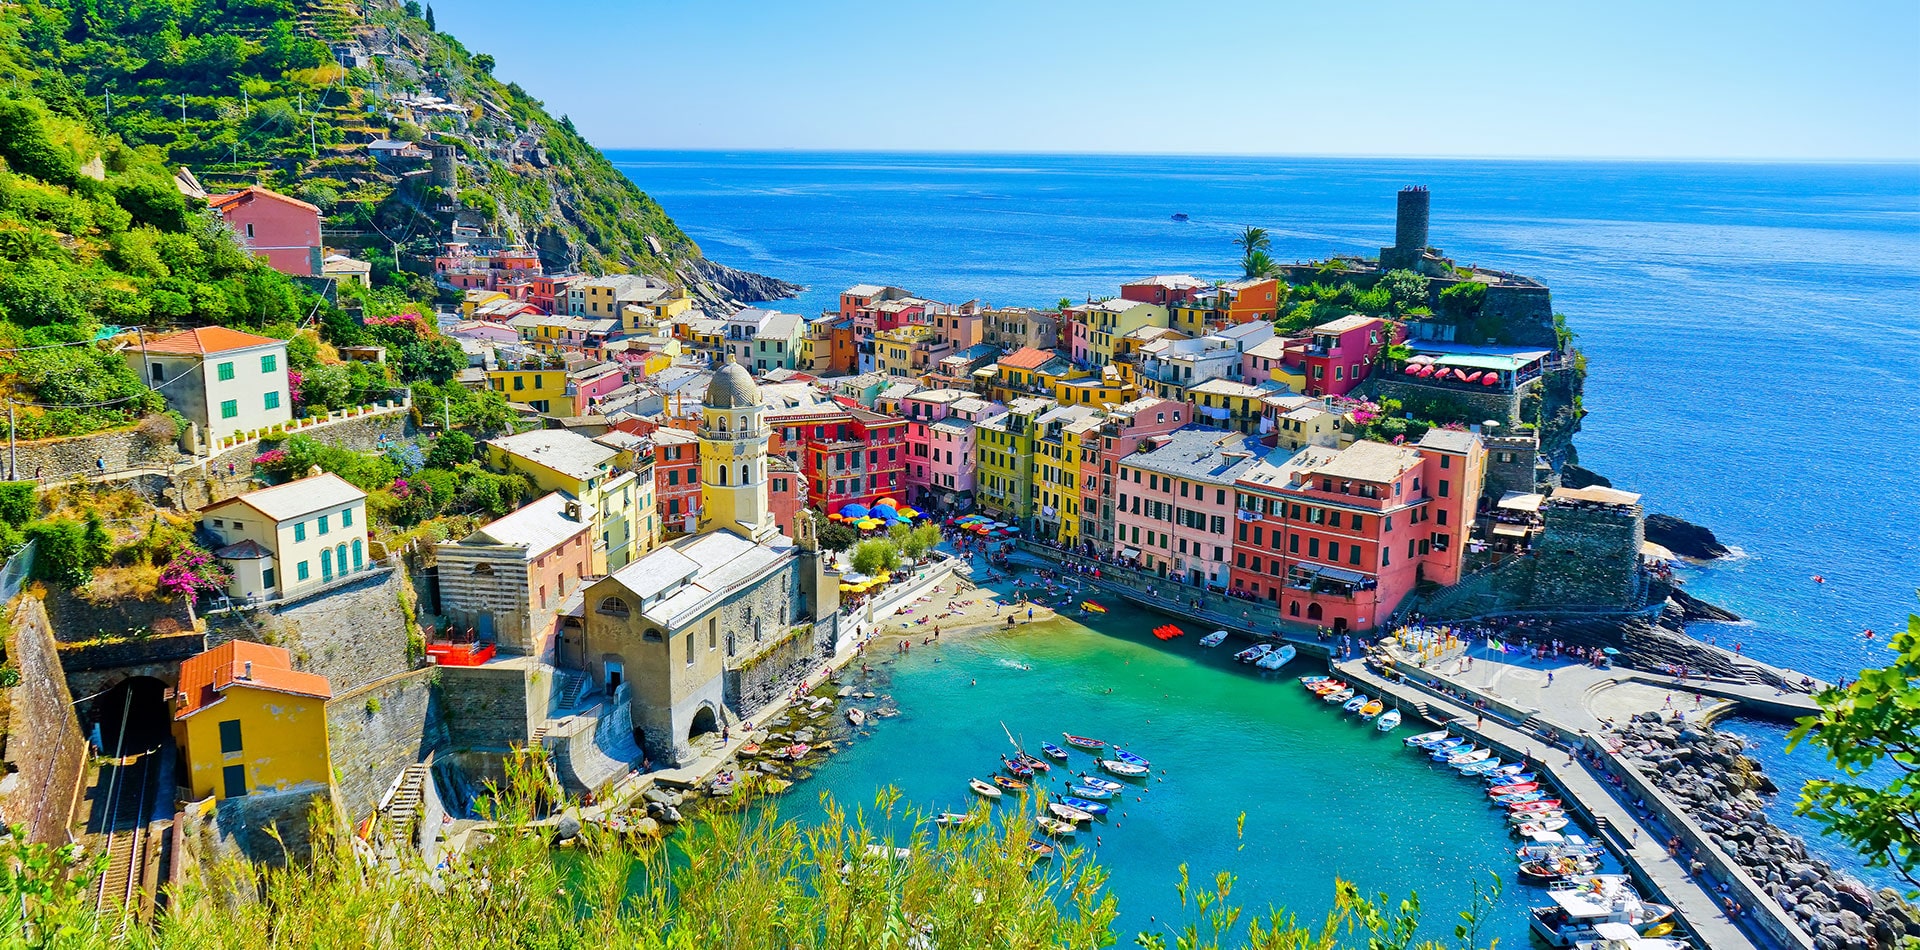 Colourful buildings on the coast of Vernazza, Cinque terre, Italy